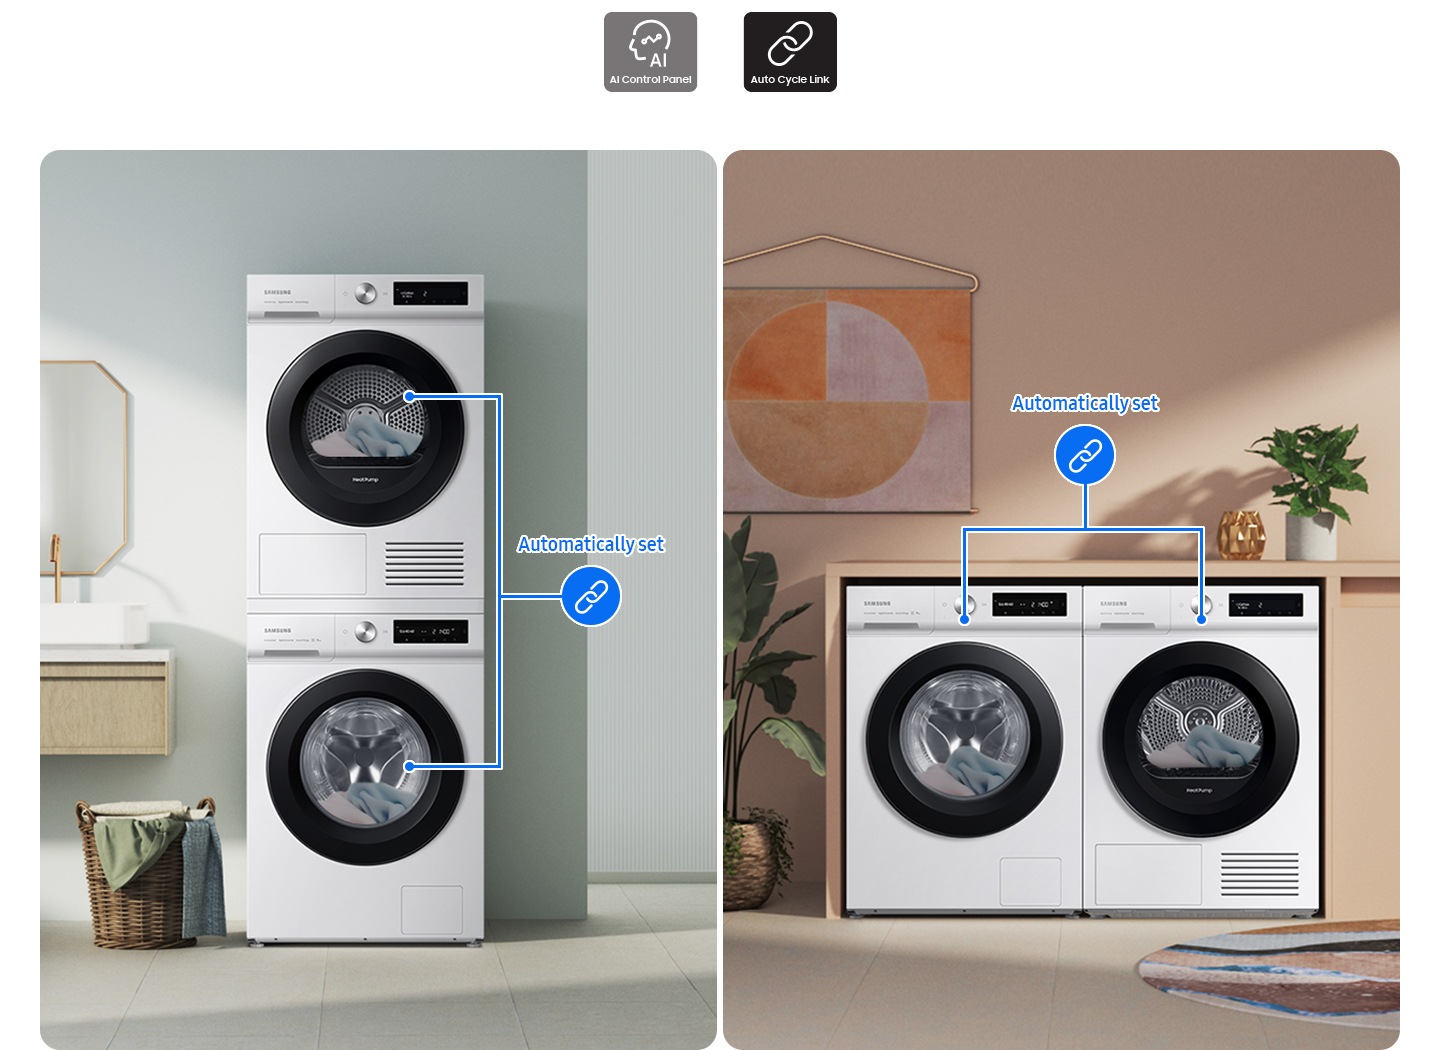 Two sets of washers and dryers are placed differently in two separate living spaces. Drying cycles are automatically set.